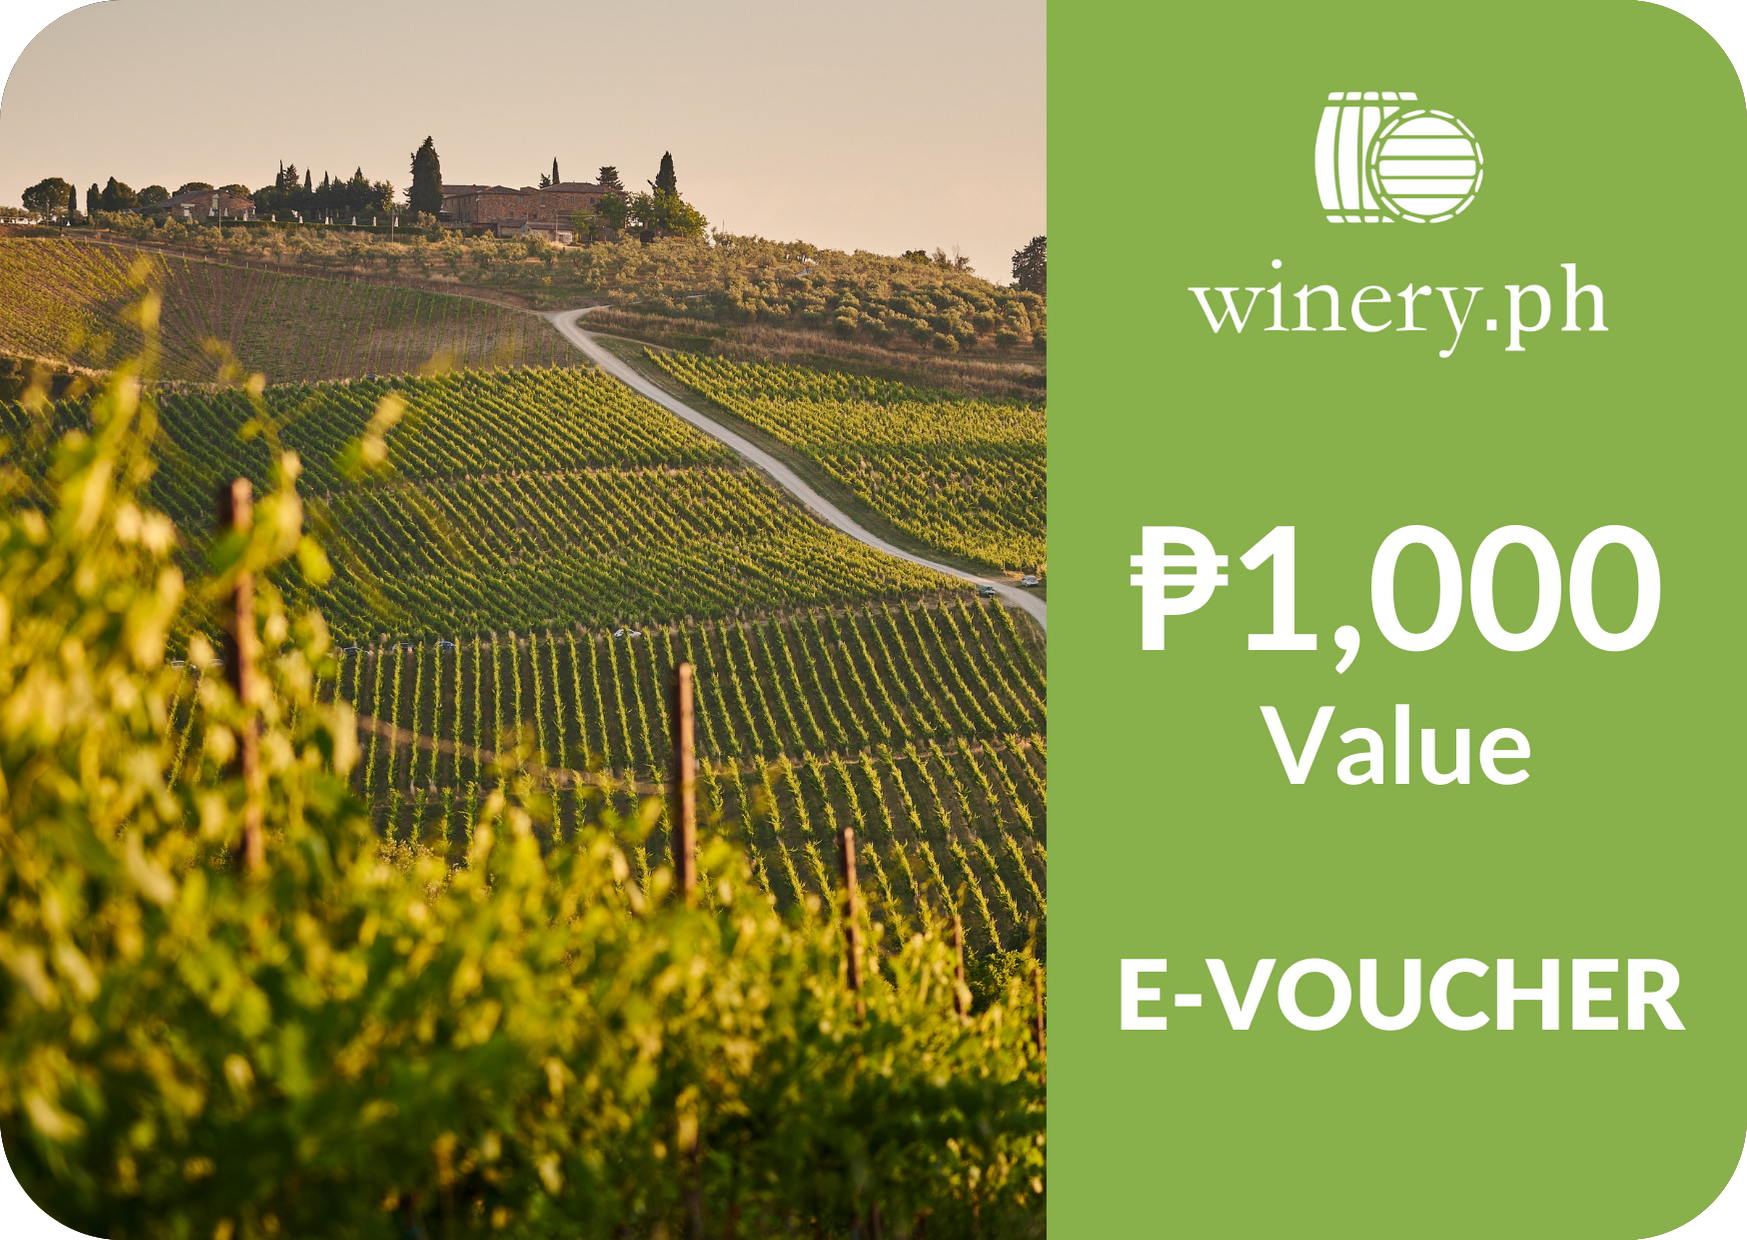 One Thousand Peso (Php 1,000) Winery.ph e-Voucher